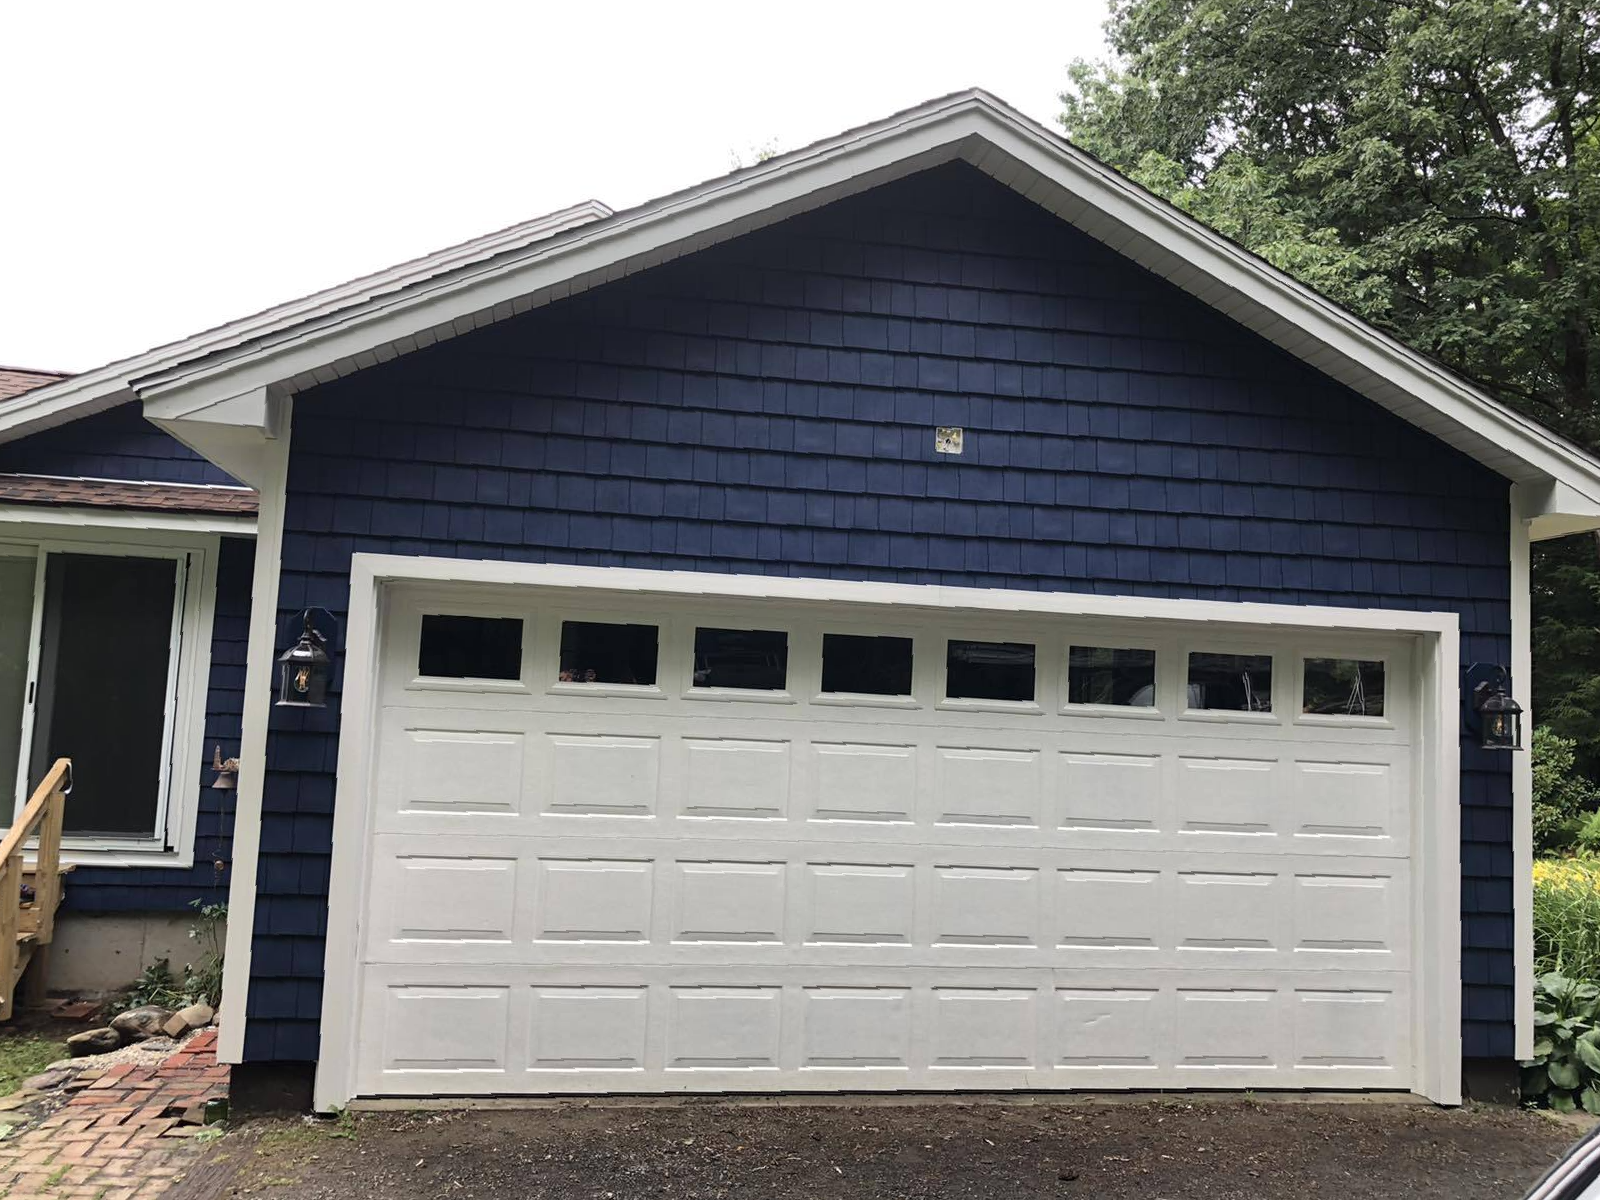 Garage sided with new dark blue shake vinyl siding and white trim for complimentary.